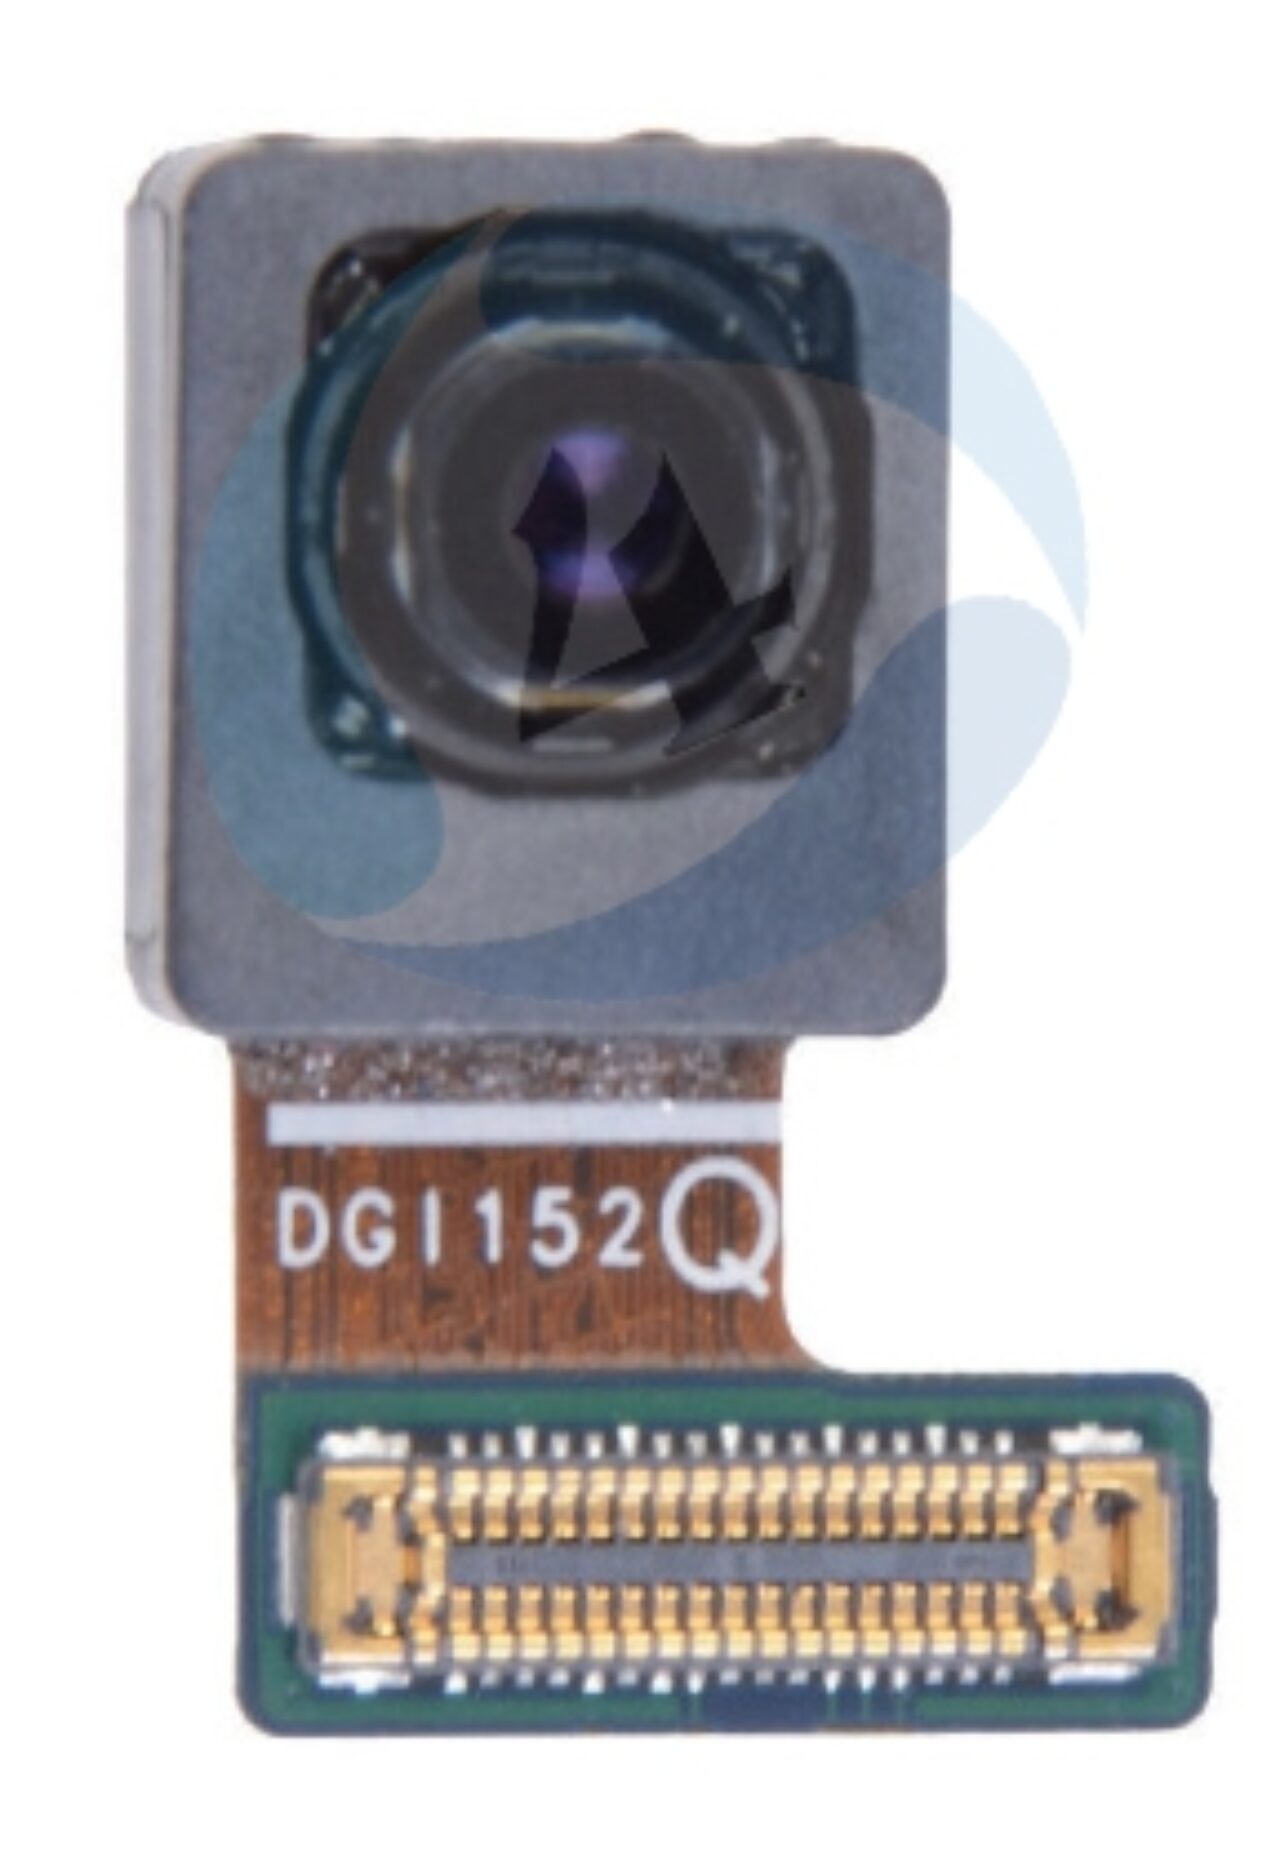 Samsung Note 9 front camera module